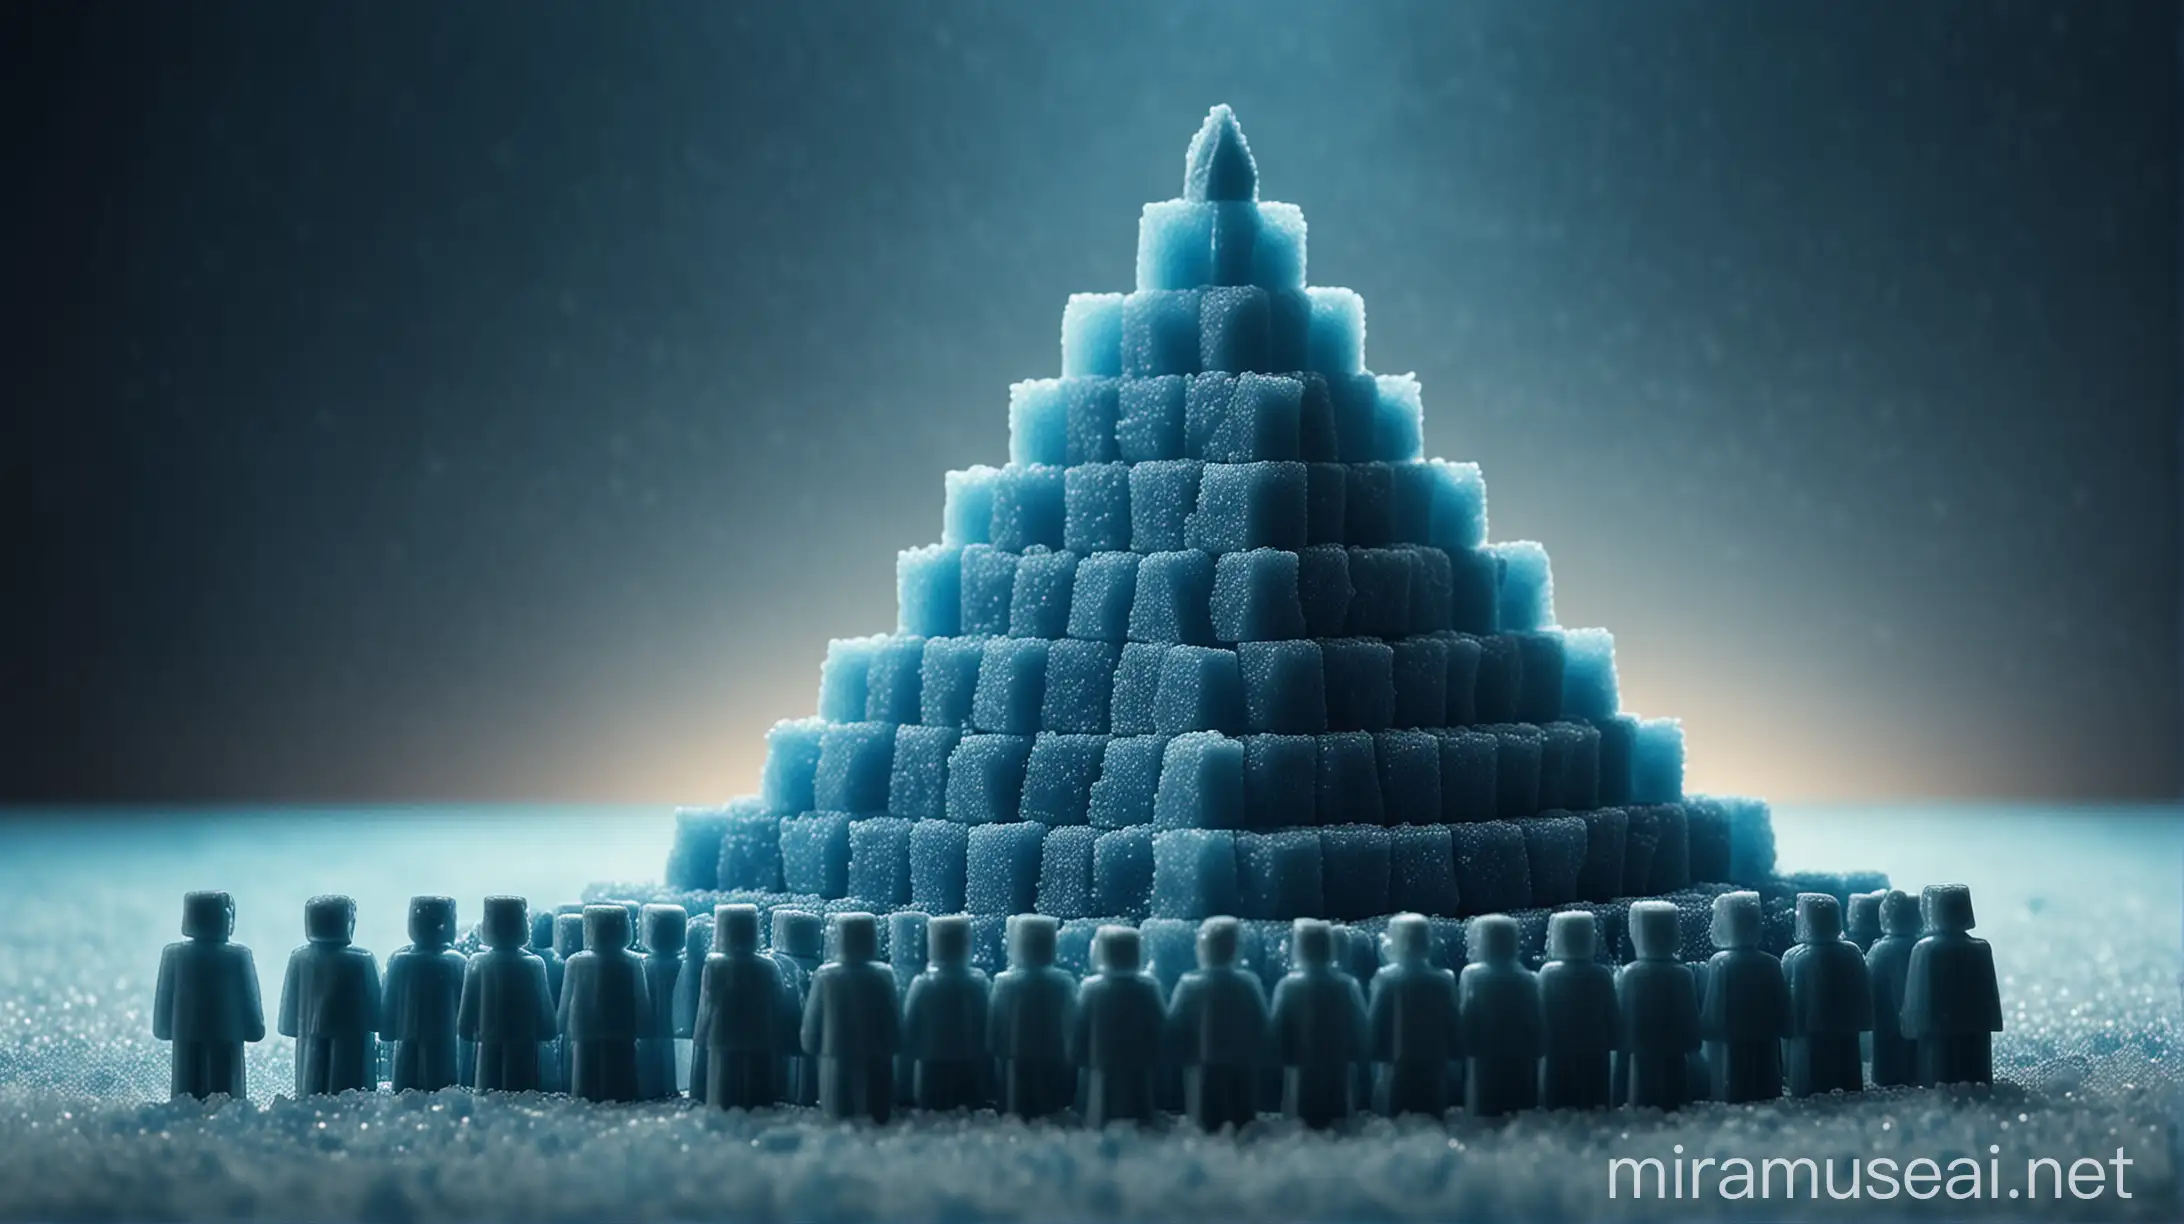 Cinematic Blue Sugar Cube Pyramid with Miniature Wax Figures